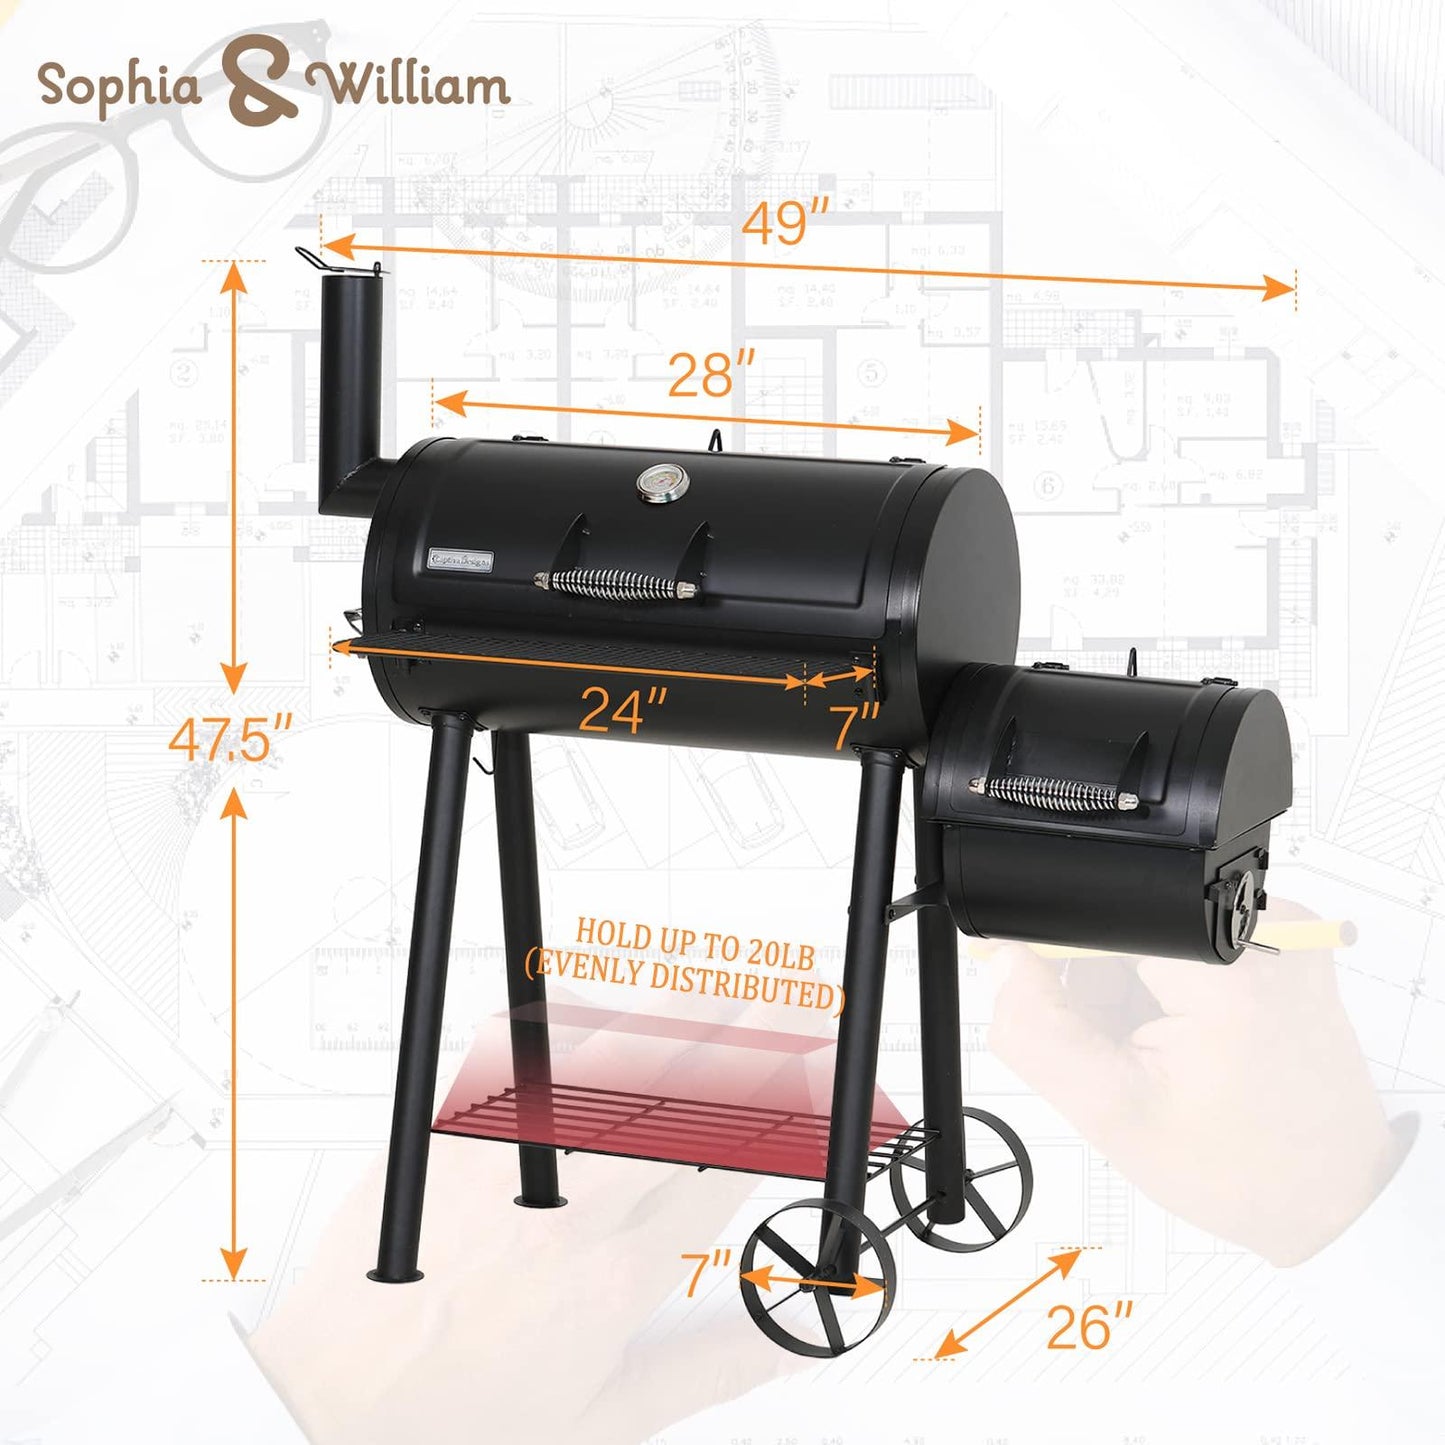 Sophia & William Charcoal Grill with Offset Smoker, 512 Square Inches Outdoor BBQ Grill Offset Charcoal Smoker for Patio, Garden, Picnics, Camping, Backyard Cooking, Black - CookCave